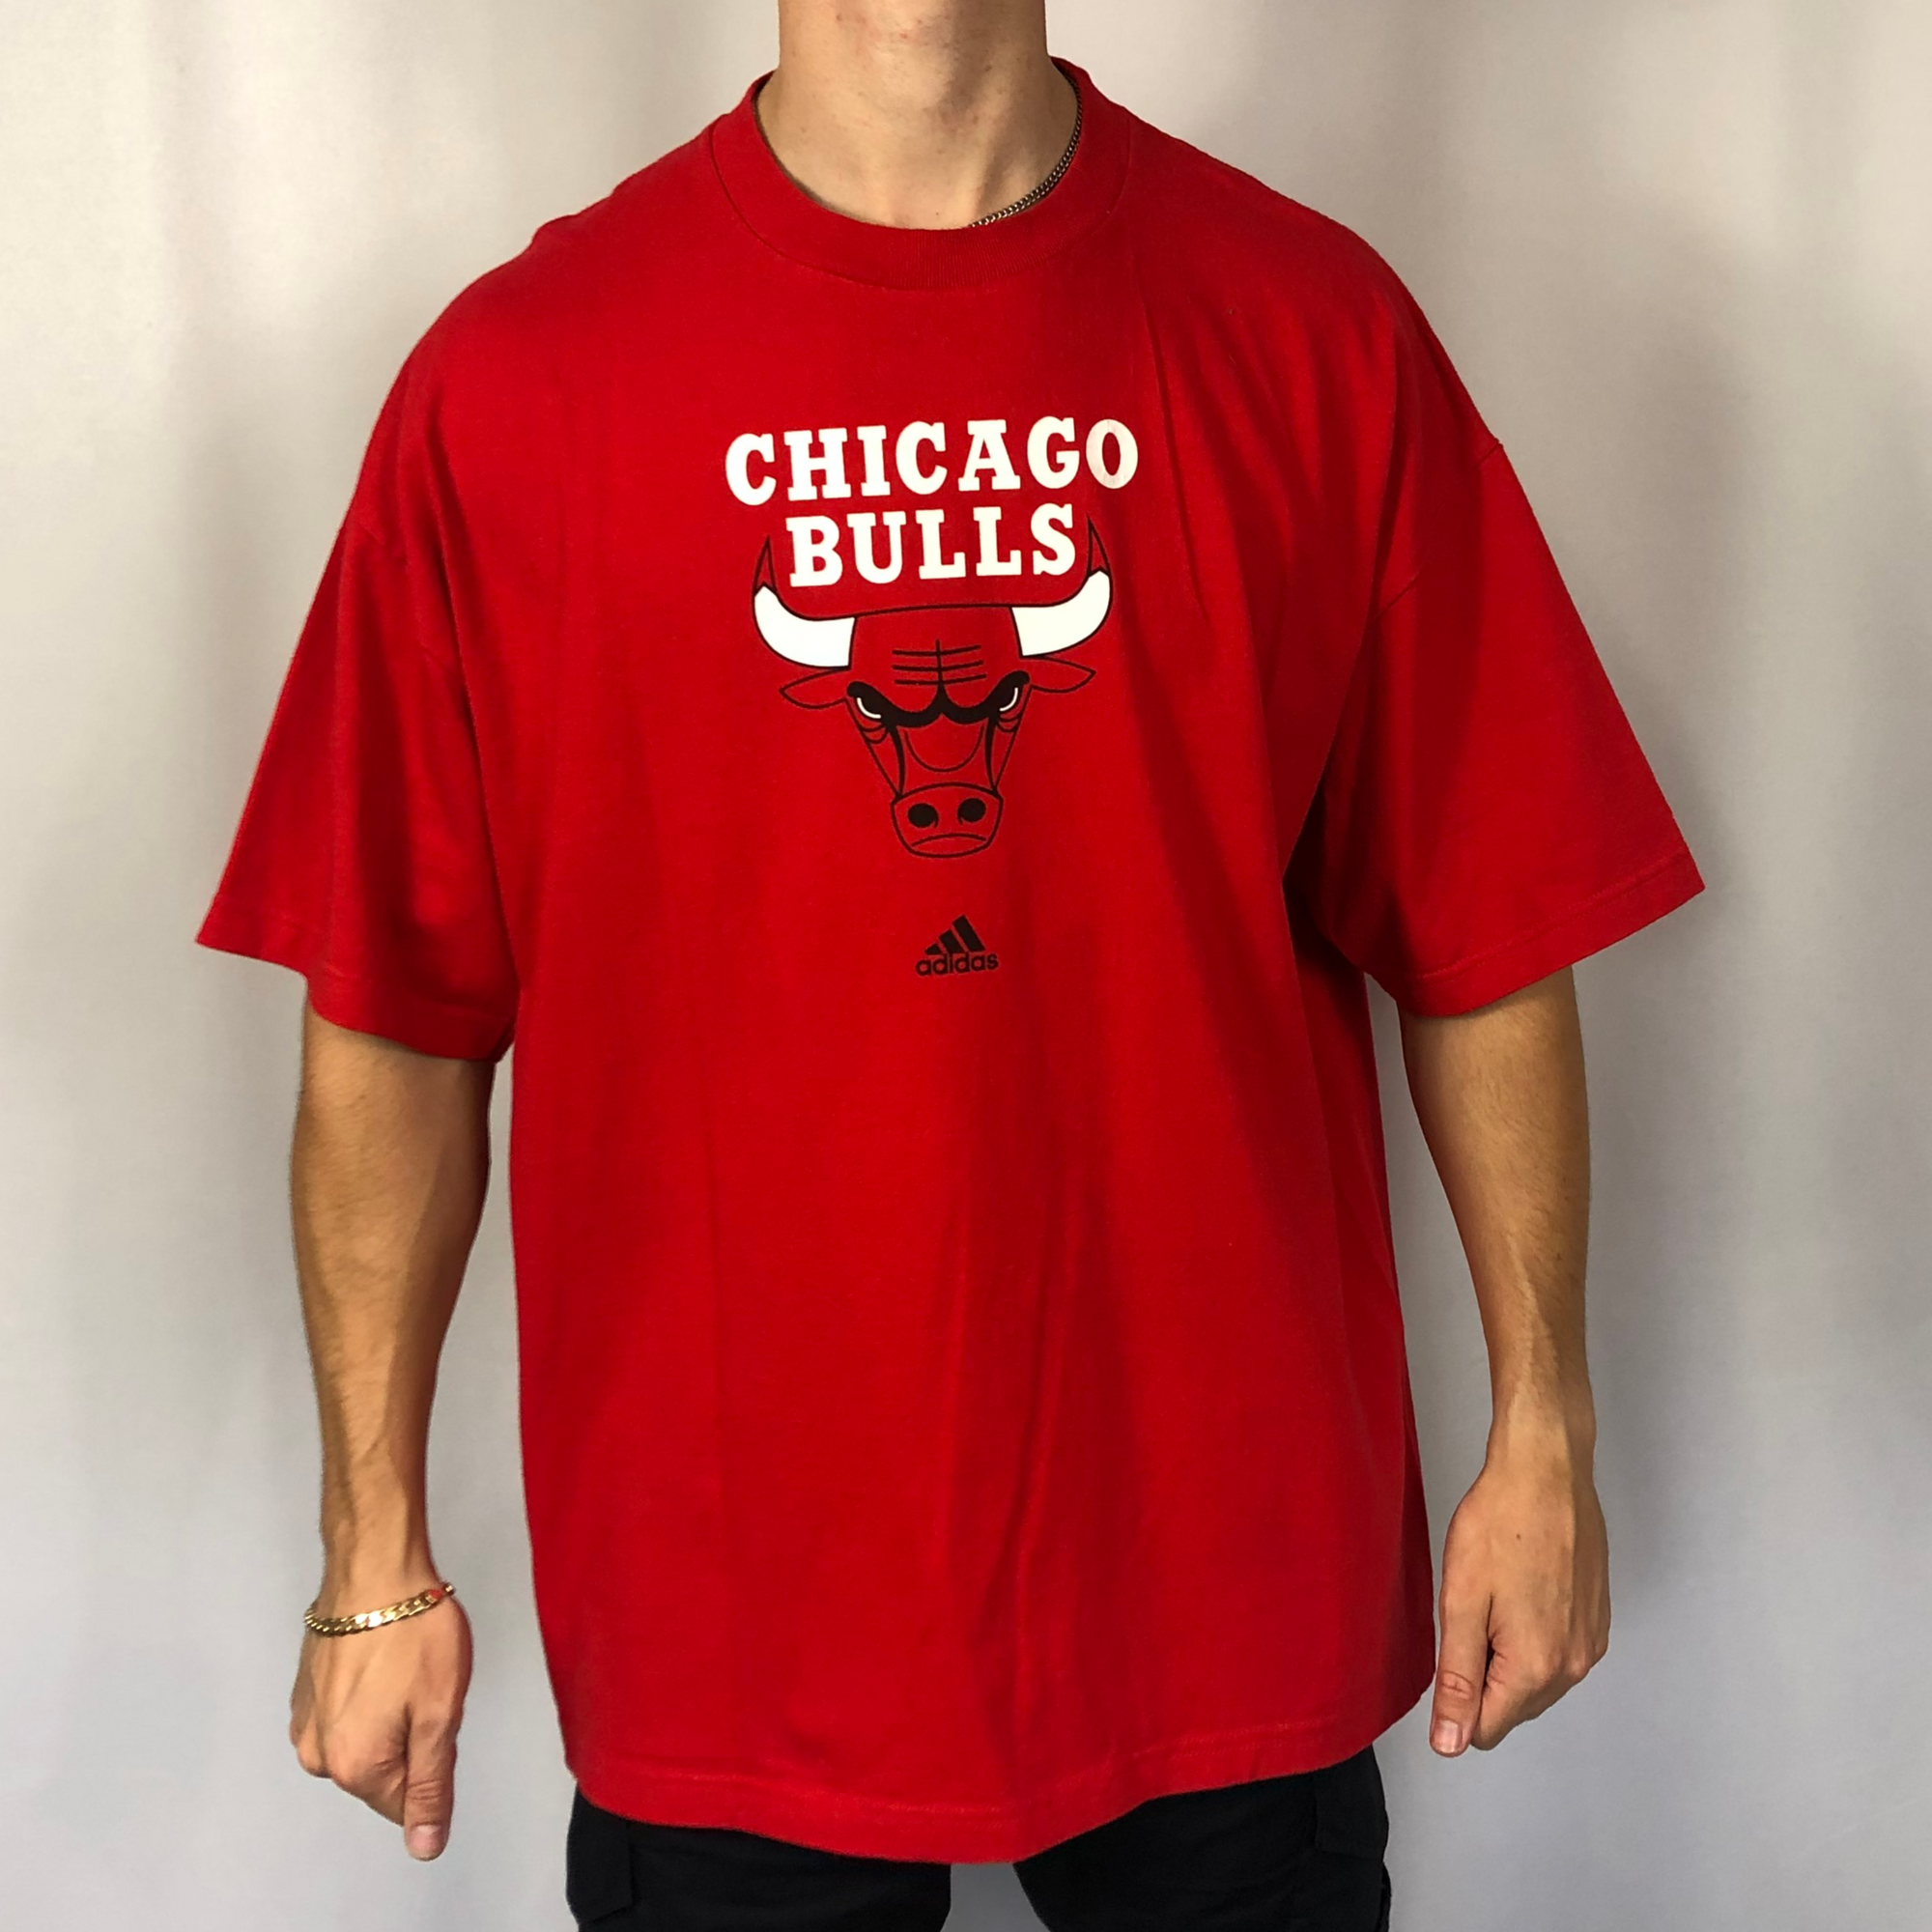 Vintage Oversized Adidas Chicago Bulls Tee in Red - XXL